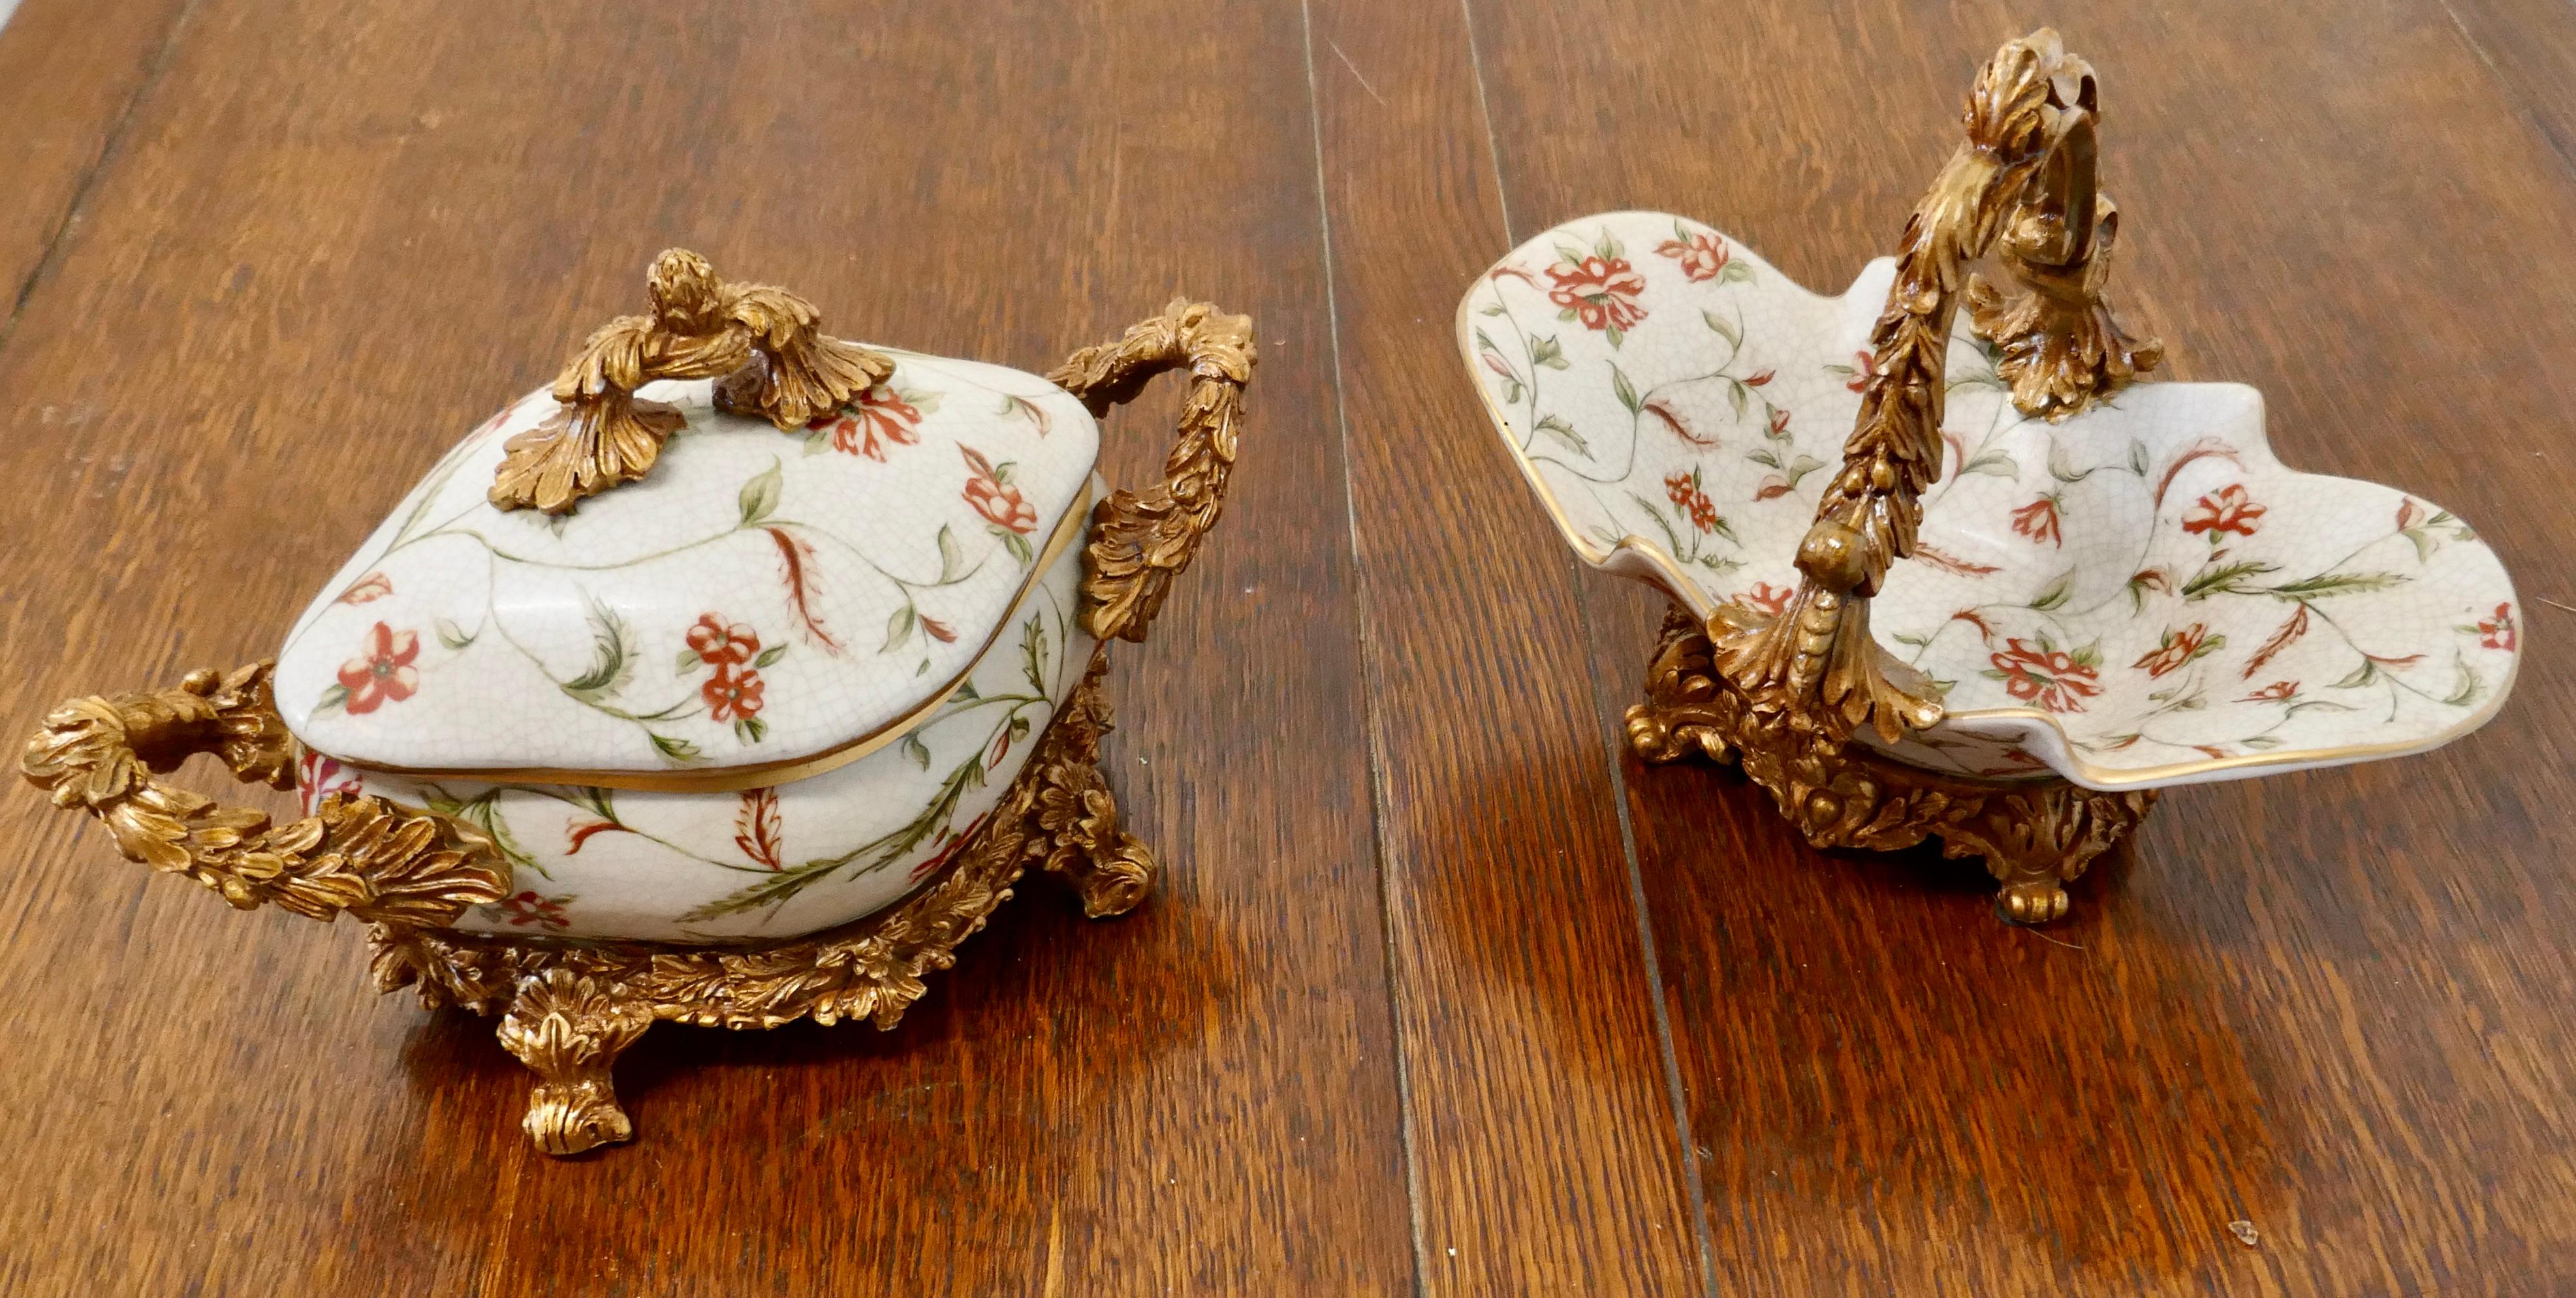 Pair of French Rococo style sweet Dishes

A very attractive pair of sweet dishes one with a handle, the other with a lid the dishes have a slightly crazed finish with simulated ormolu stands and handles, both dishes are in very good